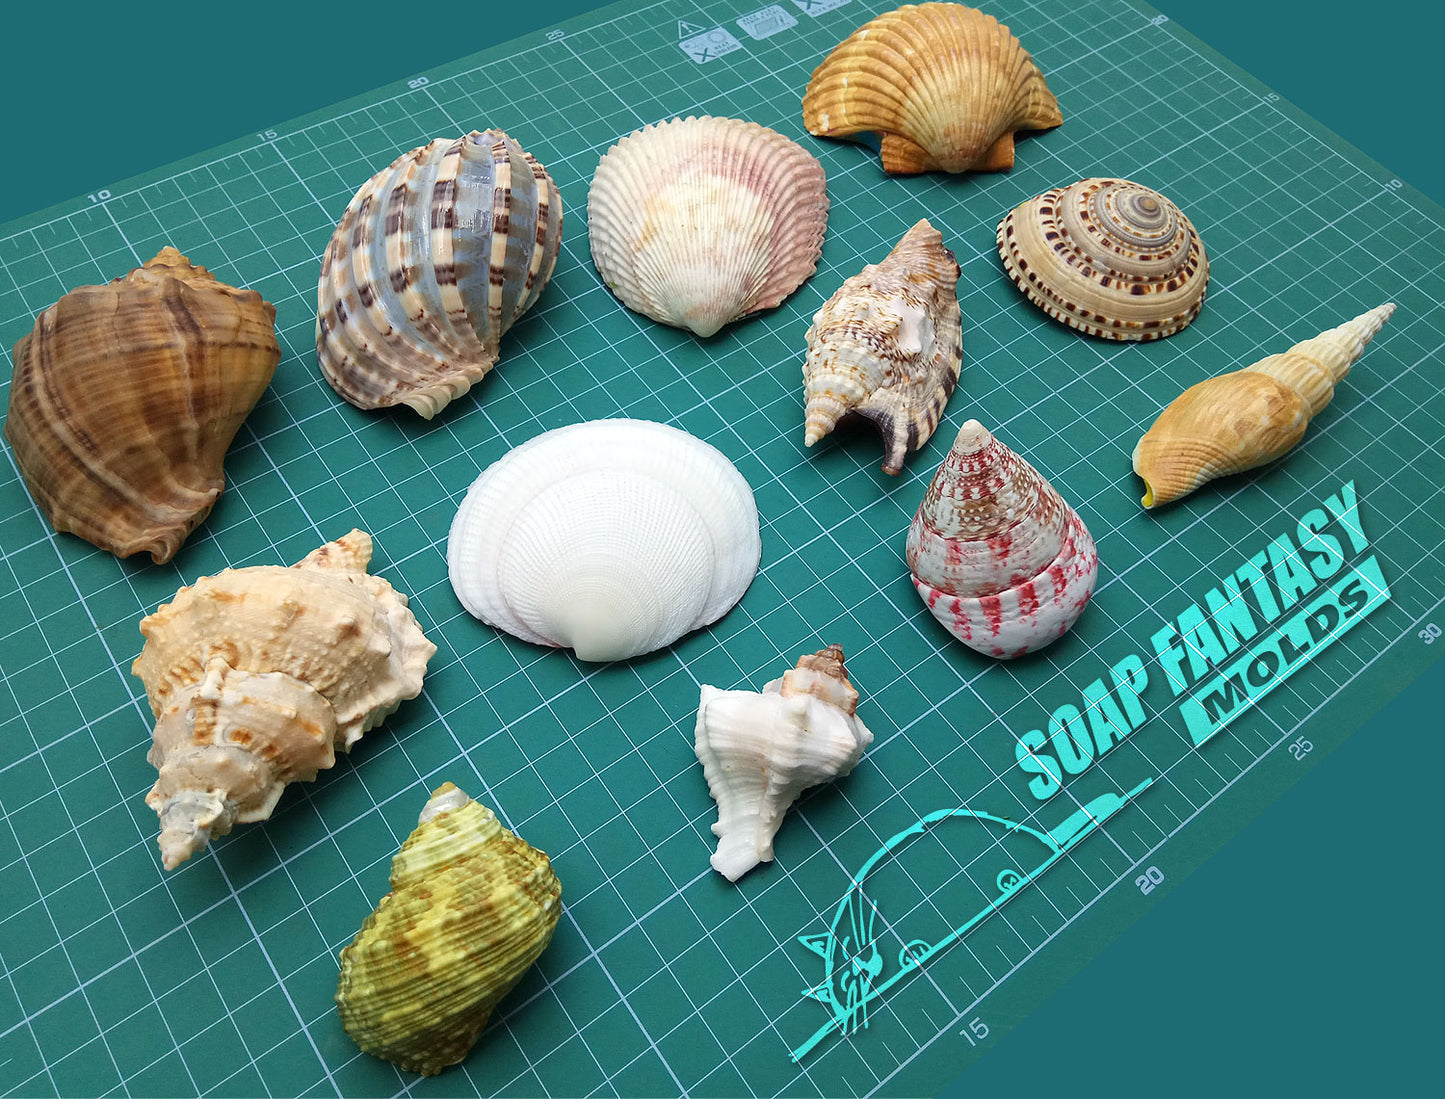 Sea shell #10 silicone mold for soap making